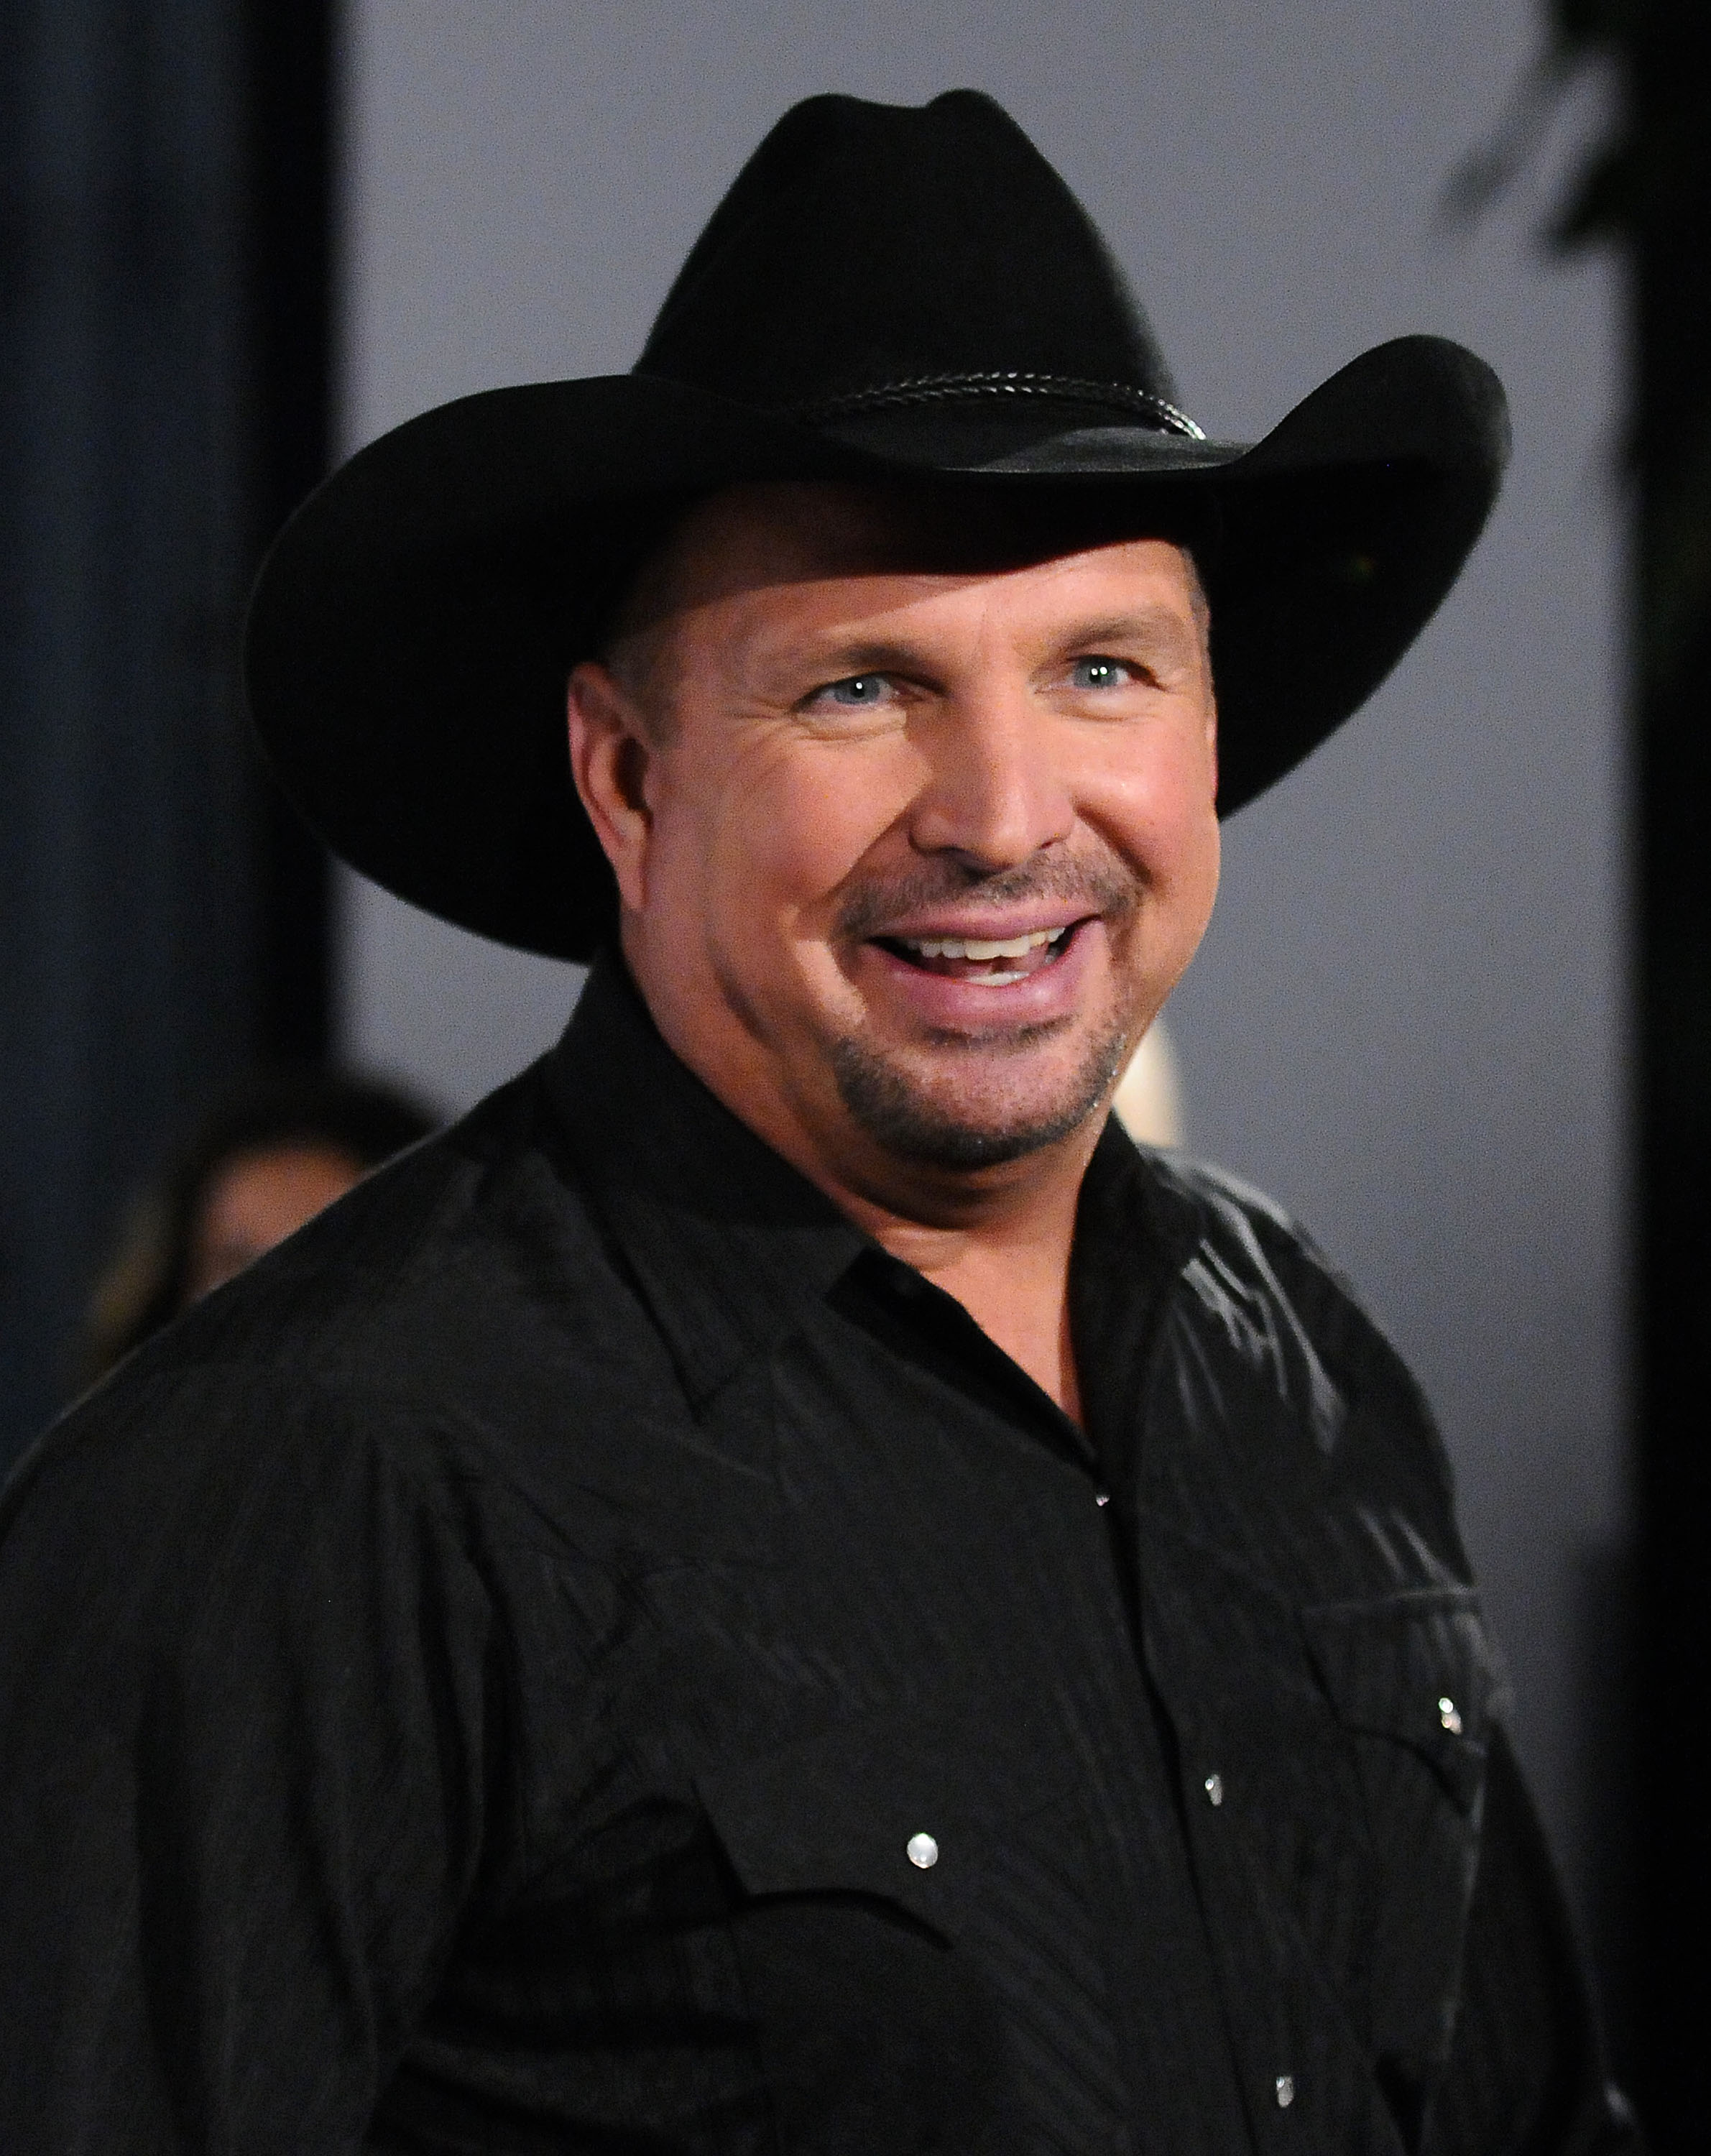 Garth Brooks Gifts His Guitar to a Fan With Cancer at Concert Closer